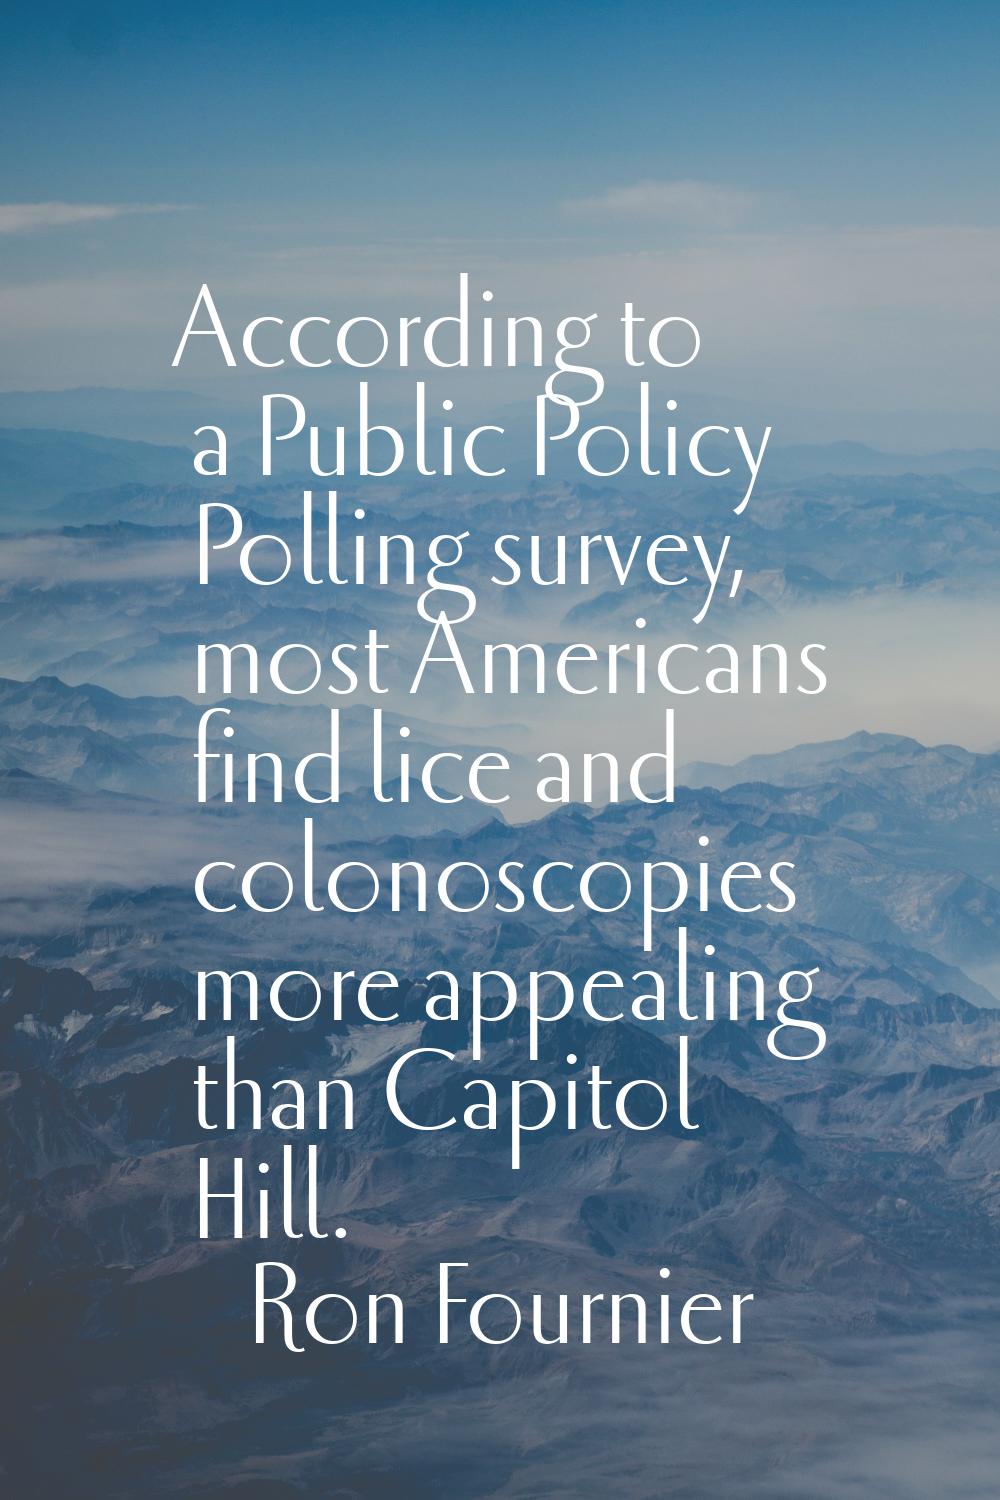 According to a Public Policy Polling survey, most Americans find lice and colonoscopies more appeal